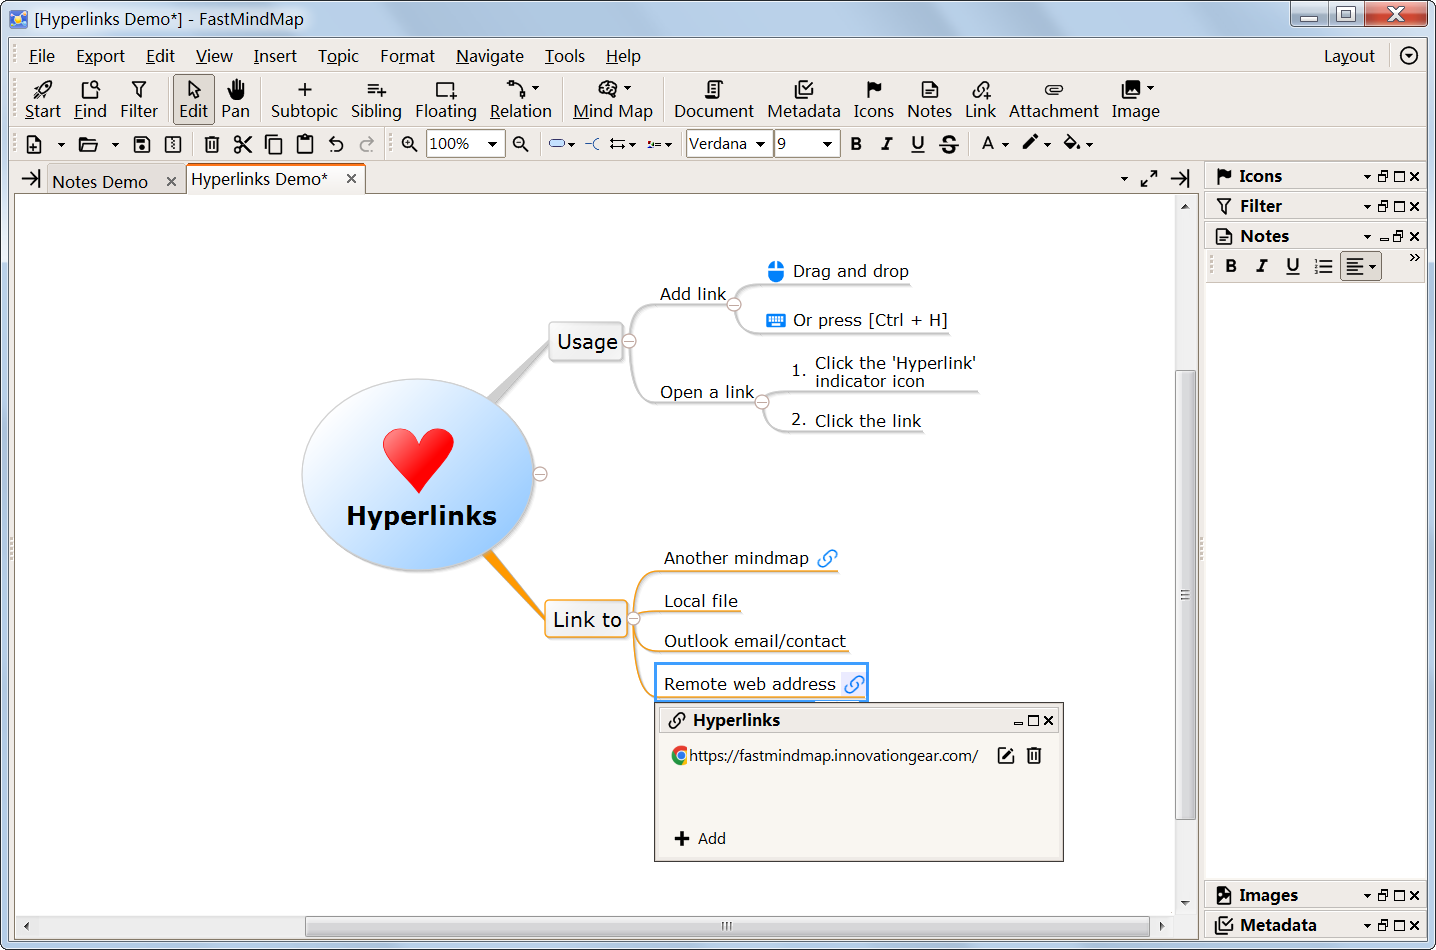 Hyperlinks in a mindmap/concept map